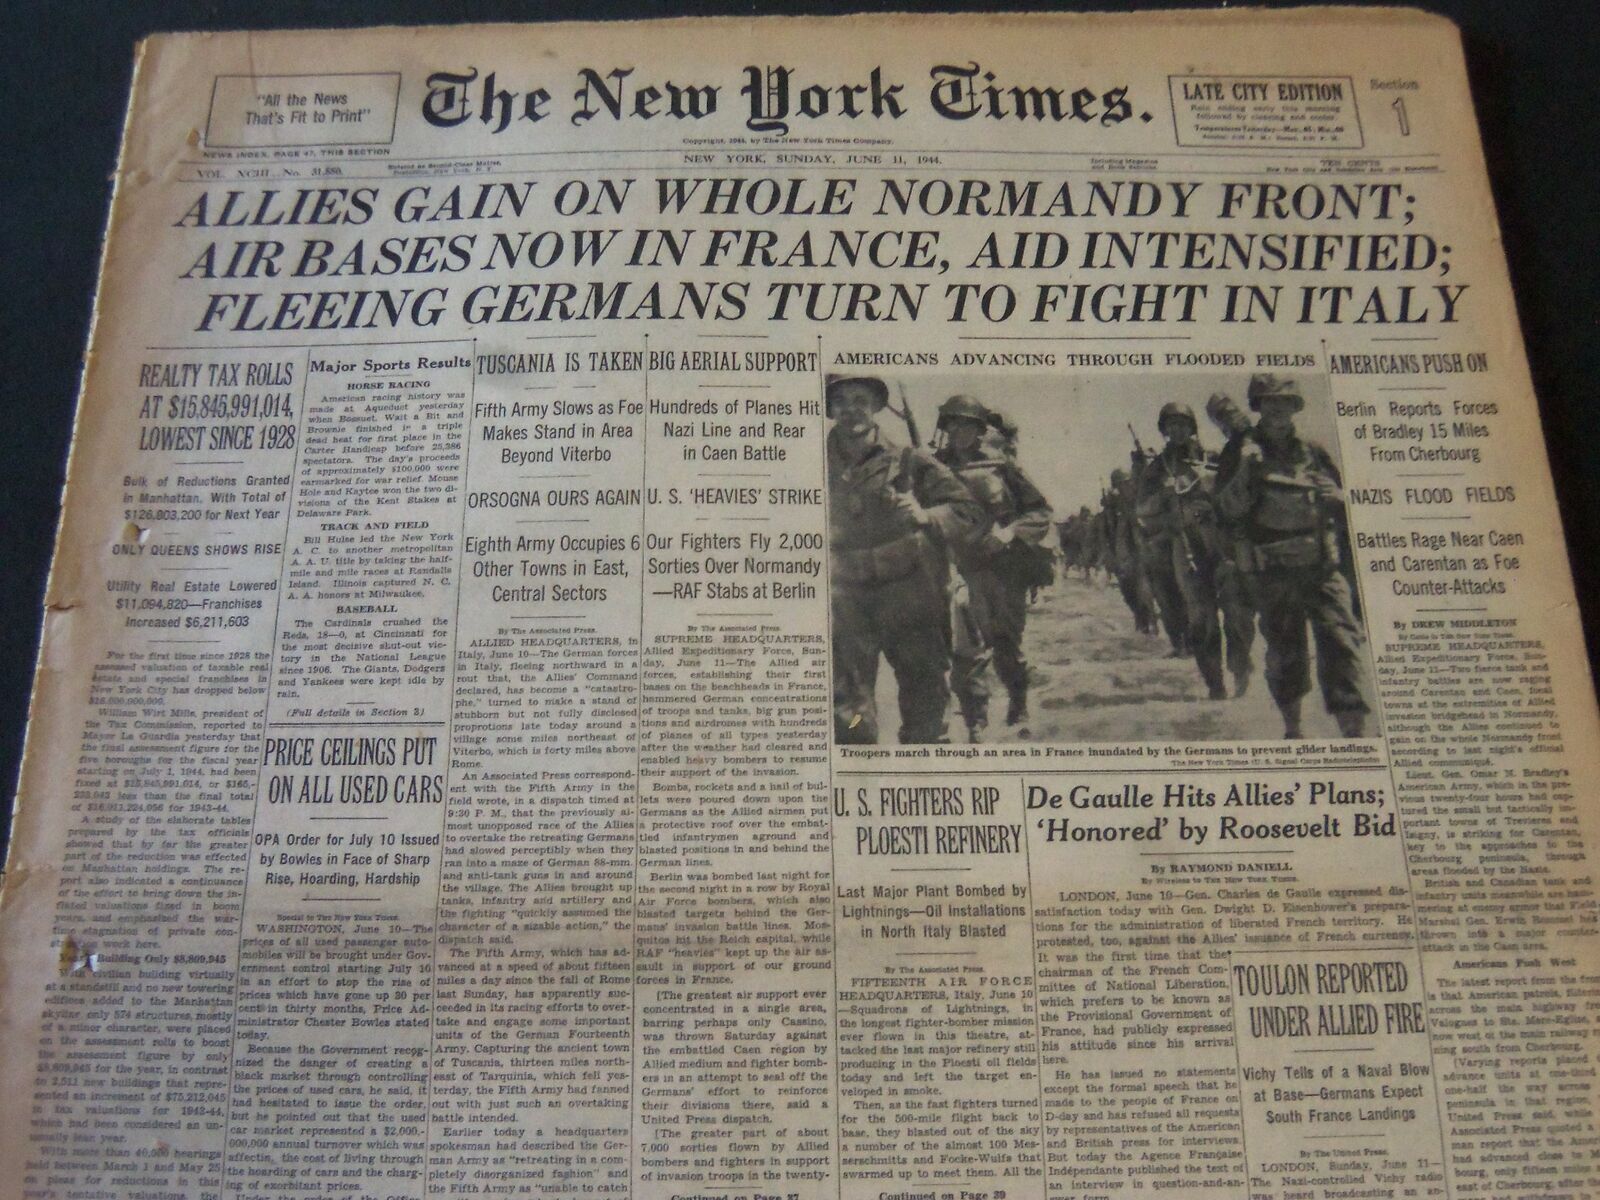 1944 JUNE 11 NEW YORK TIMES - ALLIES GAIN ON WHOLE NORMANDIE FRONT - NT 5904